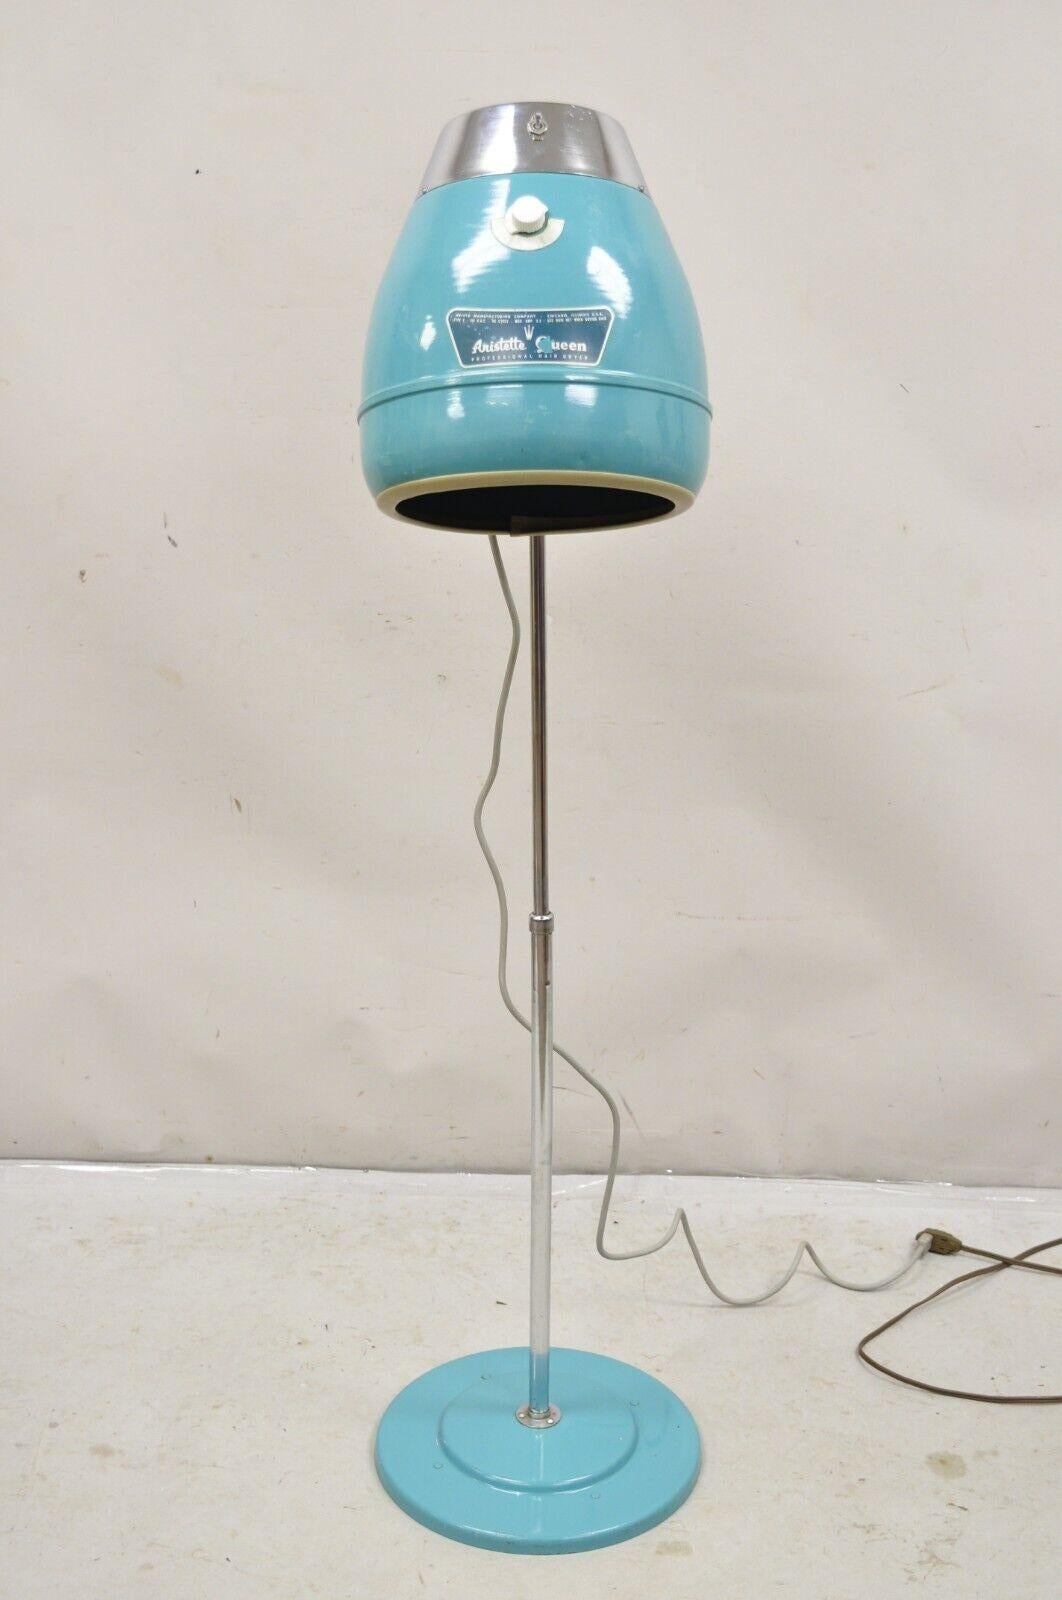 Vintage Aristette Queen Professional Standing Hood Hair Dryer in Turquoise Blue . Circa Mid 20th Century. Measurements: 57